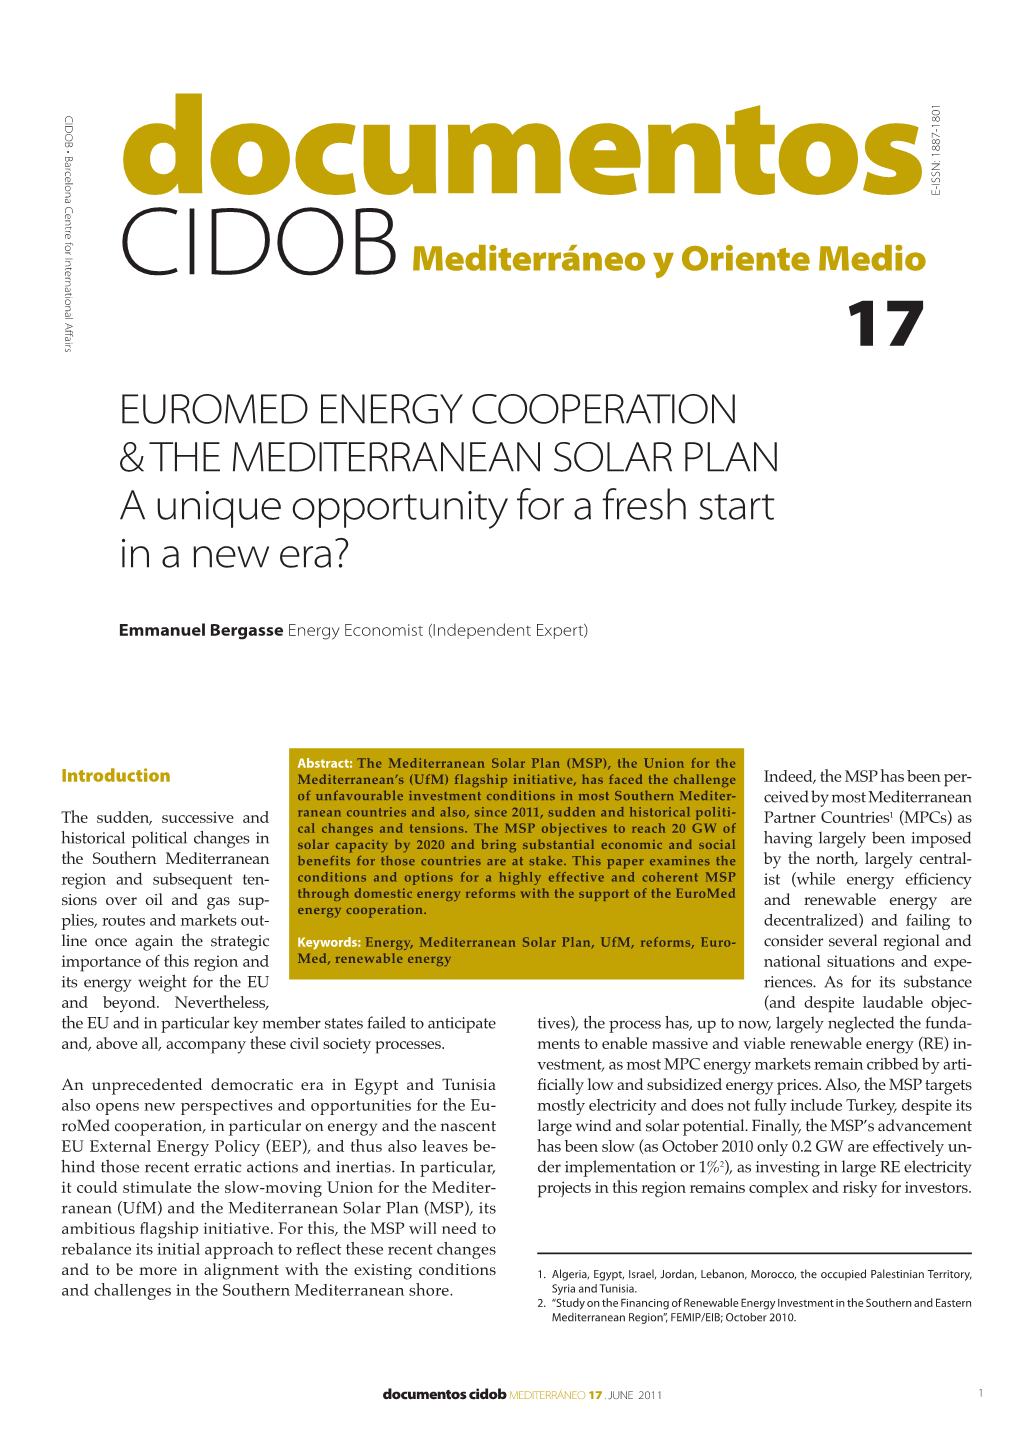 EUROMED ENERGY COOPERATION & the MEDITERRANEAN SOLAR PLAN a Unique Opportunity for a Fresh Start in a New Era?